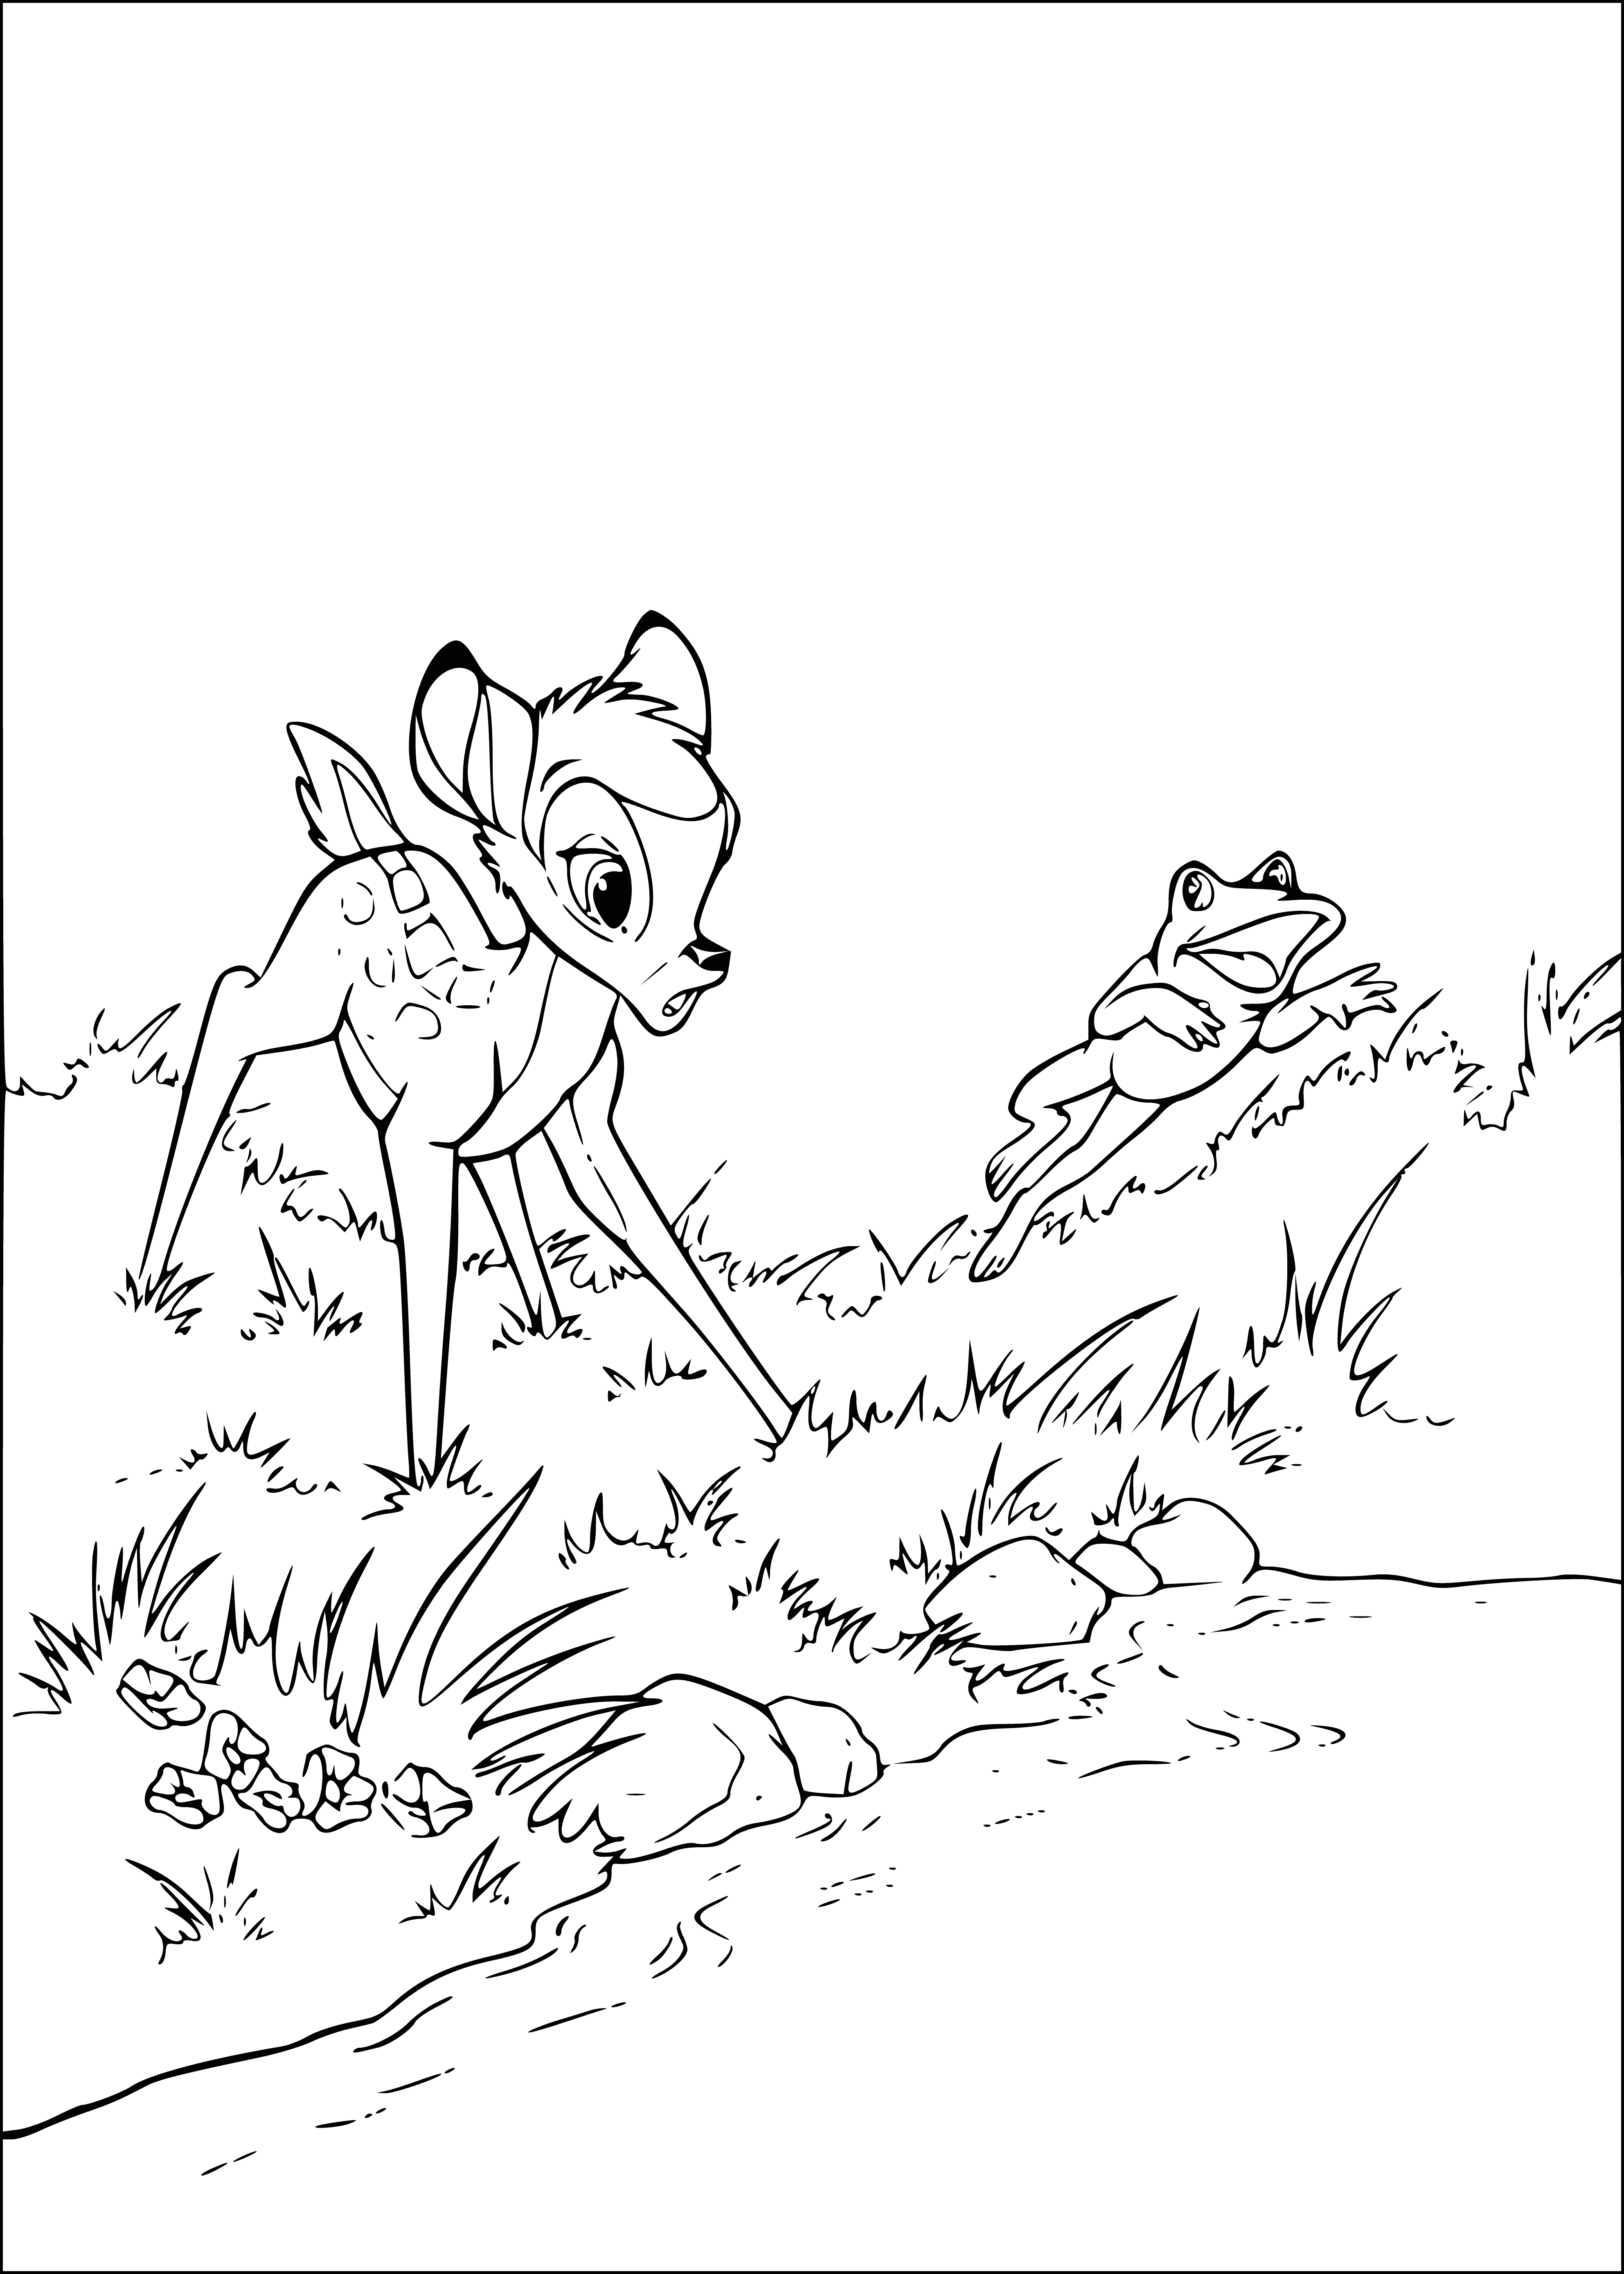 coloring page: Bambi and a frog standing in a sunny, flowery forest. Bambi looks curious and happy, frog a bit nervous. #ColoringPage